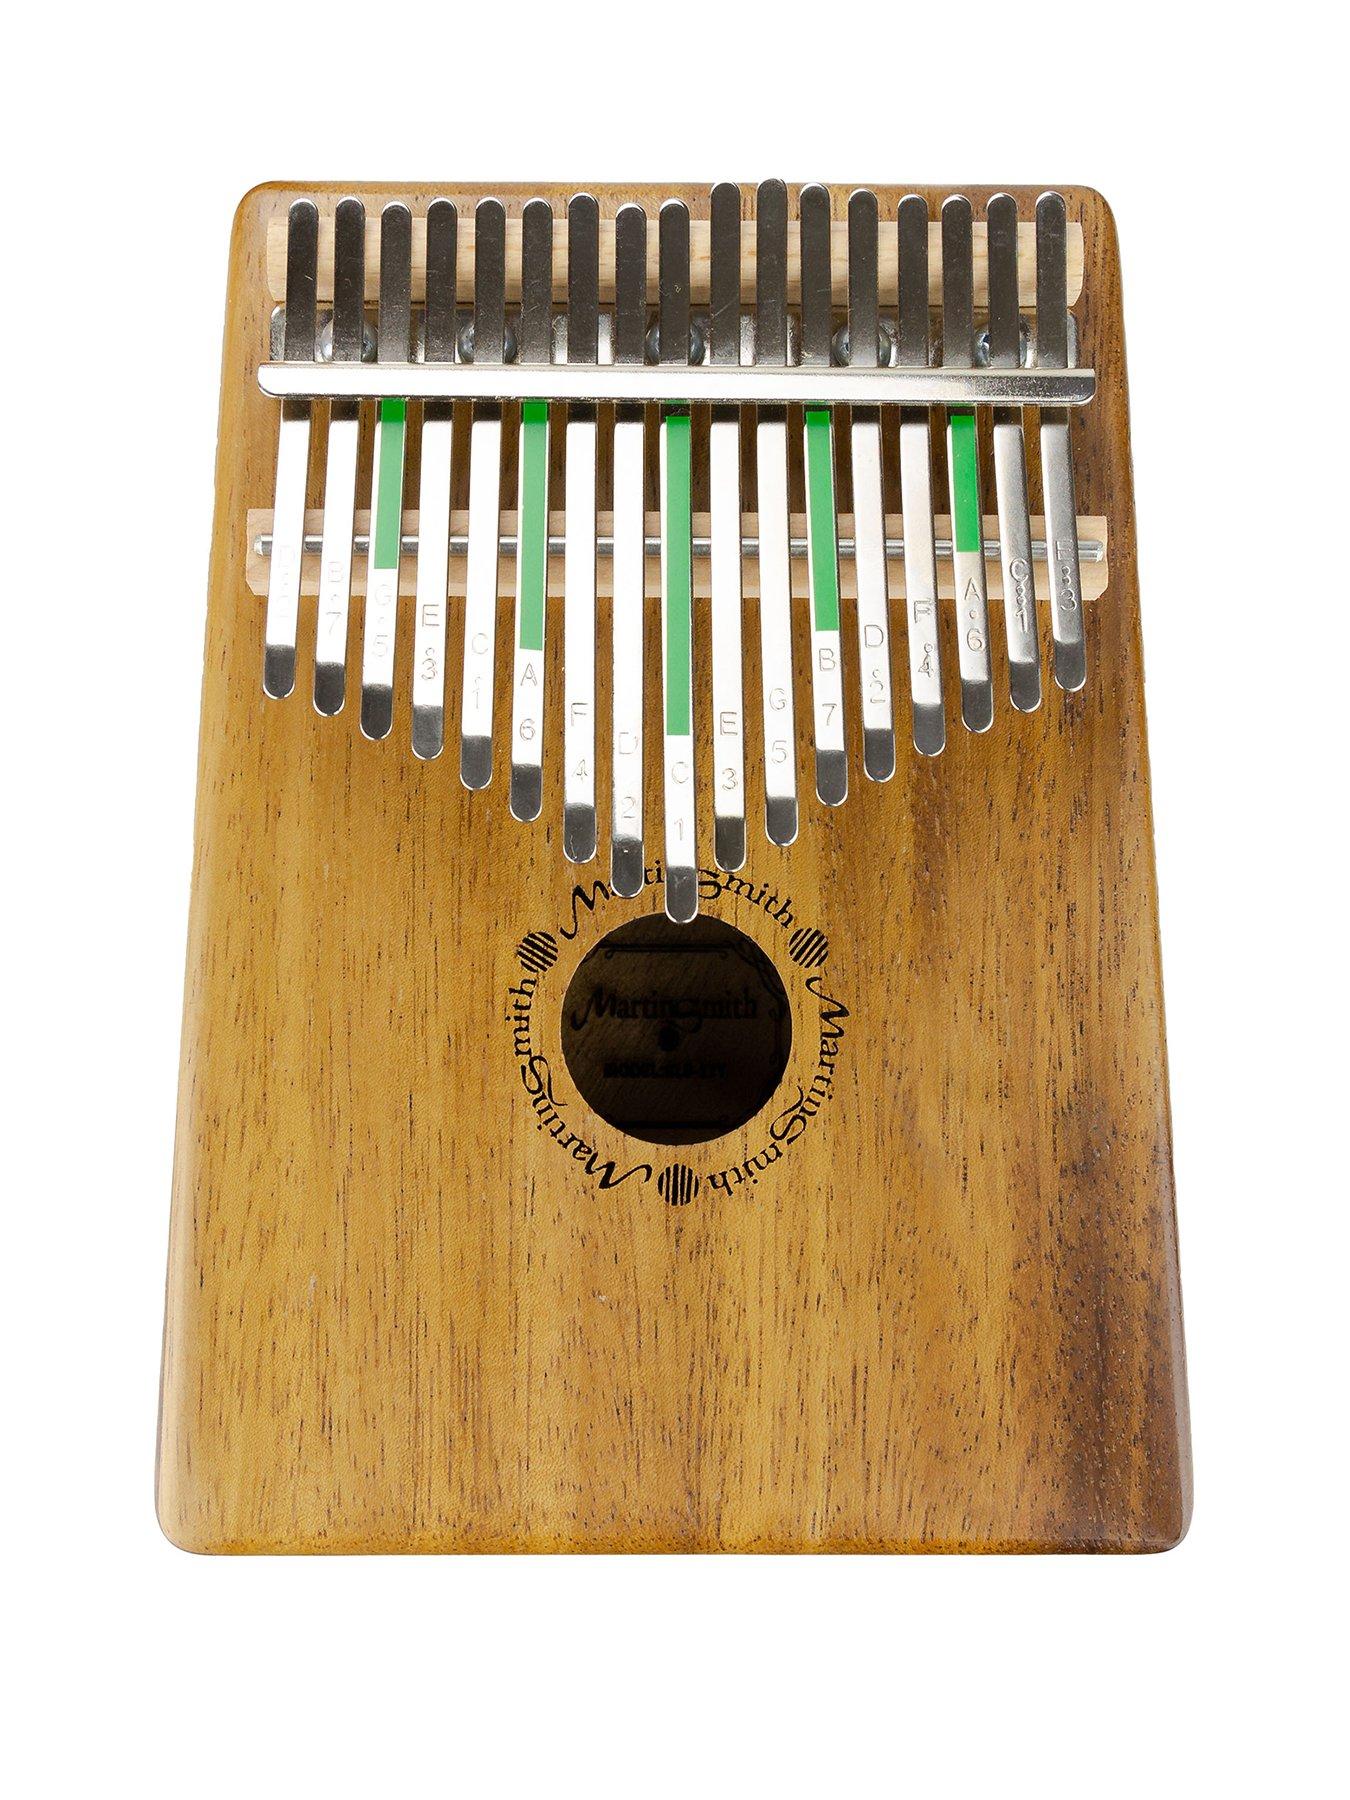 Come with a Soud Pickup Kalimba Thumb Piano 17 Key Adult Beginners Professional Women Portable Mbira Finger Piano Men Instruments Music Gifts for Kids 